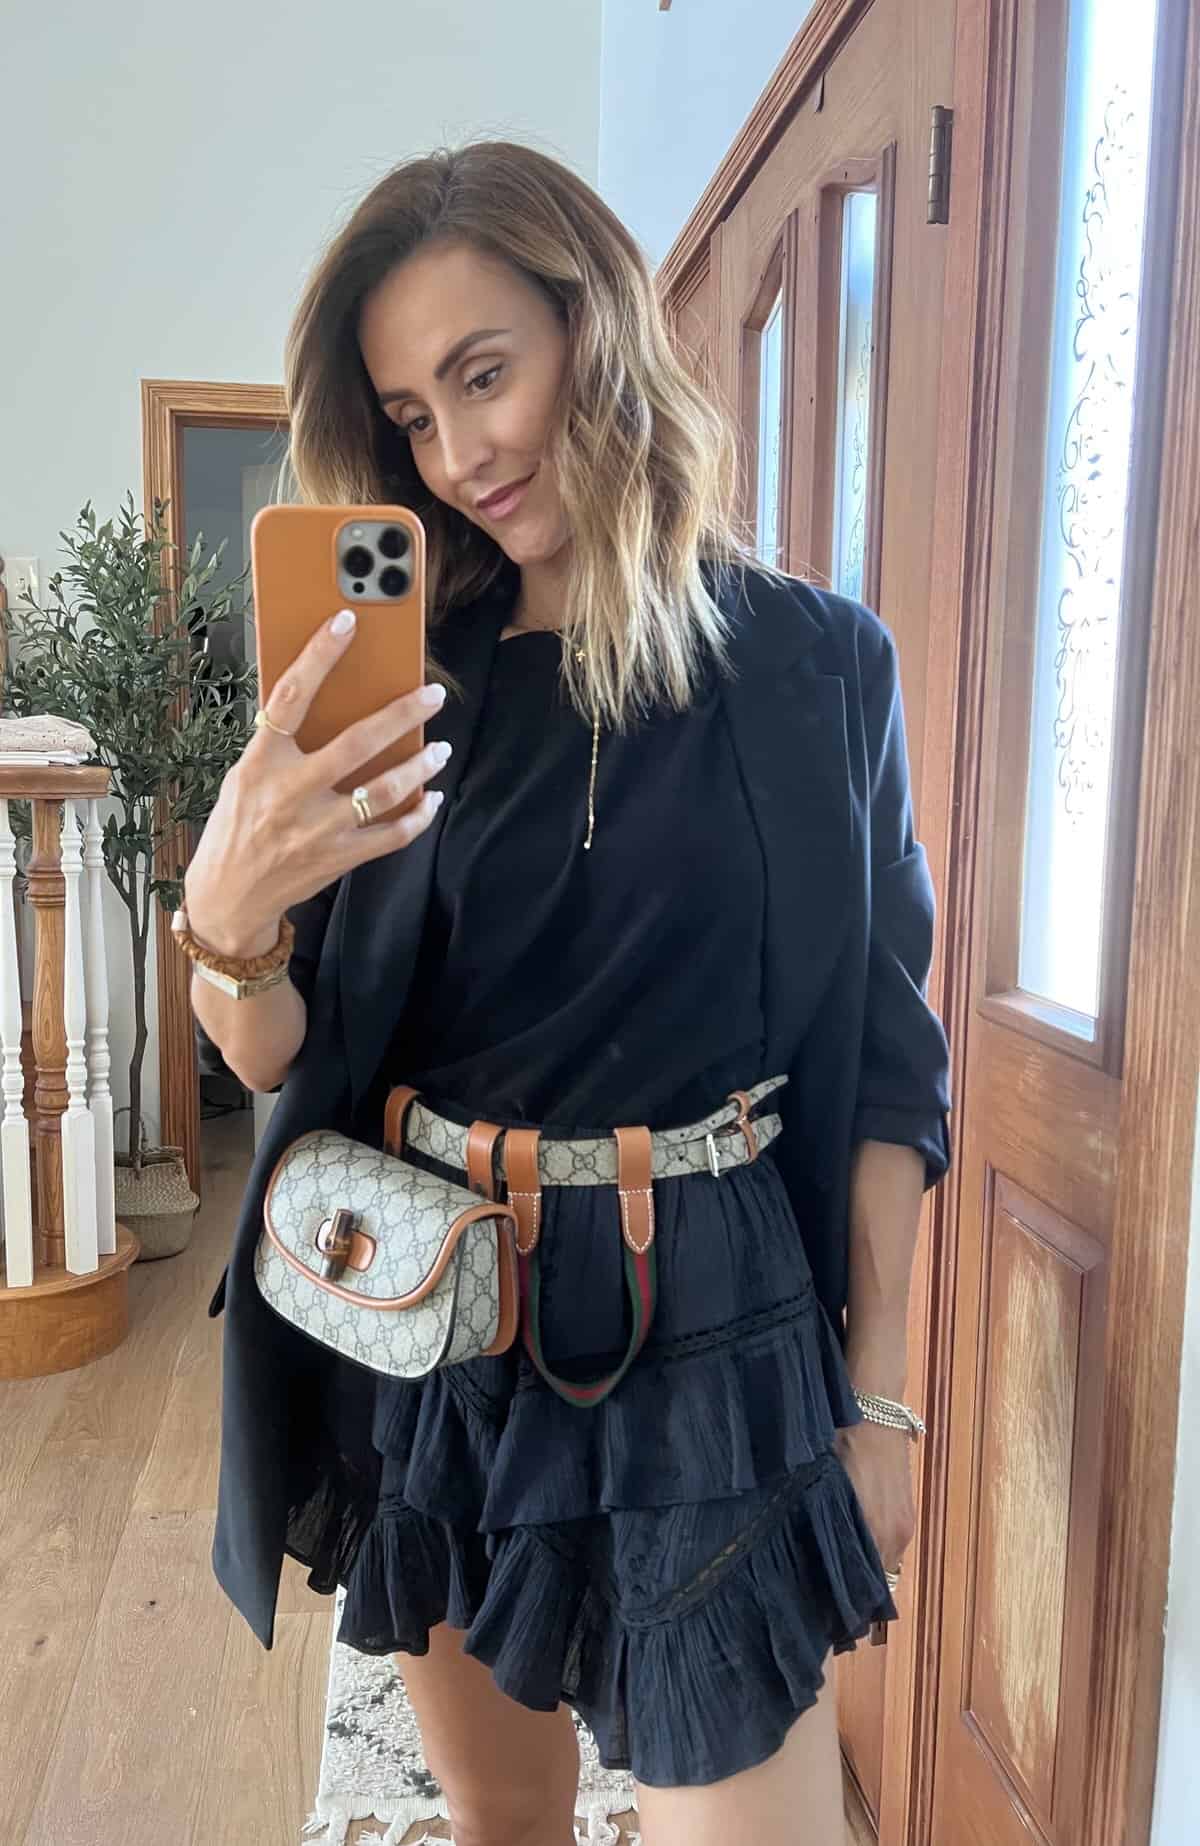 10 Ways to Style the Gucci Belt - Karina Style Diaries